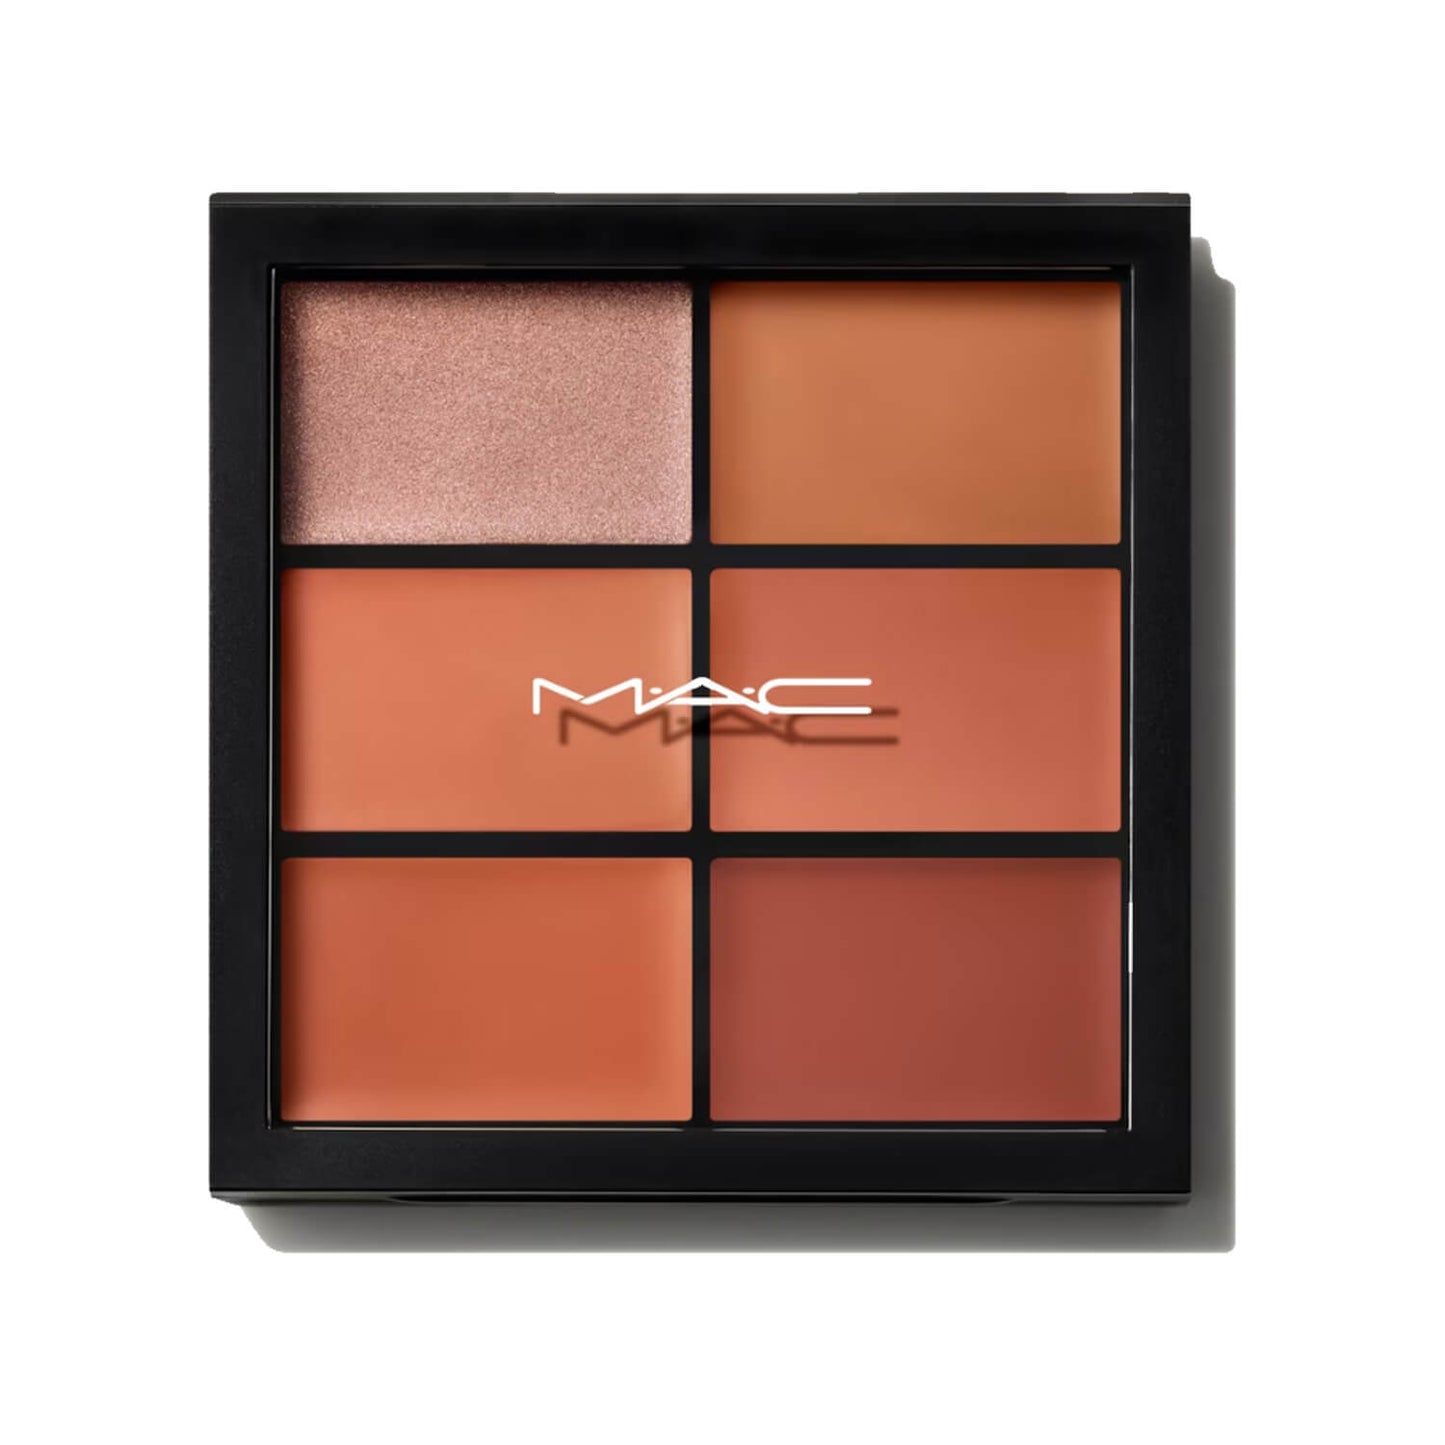 Shop MAC pro lipstick nude palette available at Heygirl.pk for delivery in Pakistan.